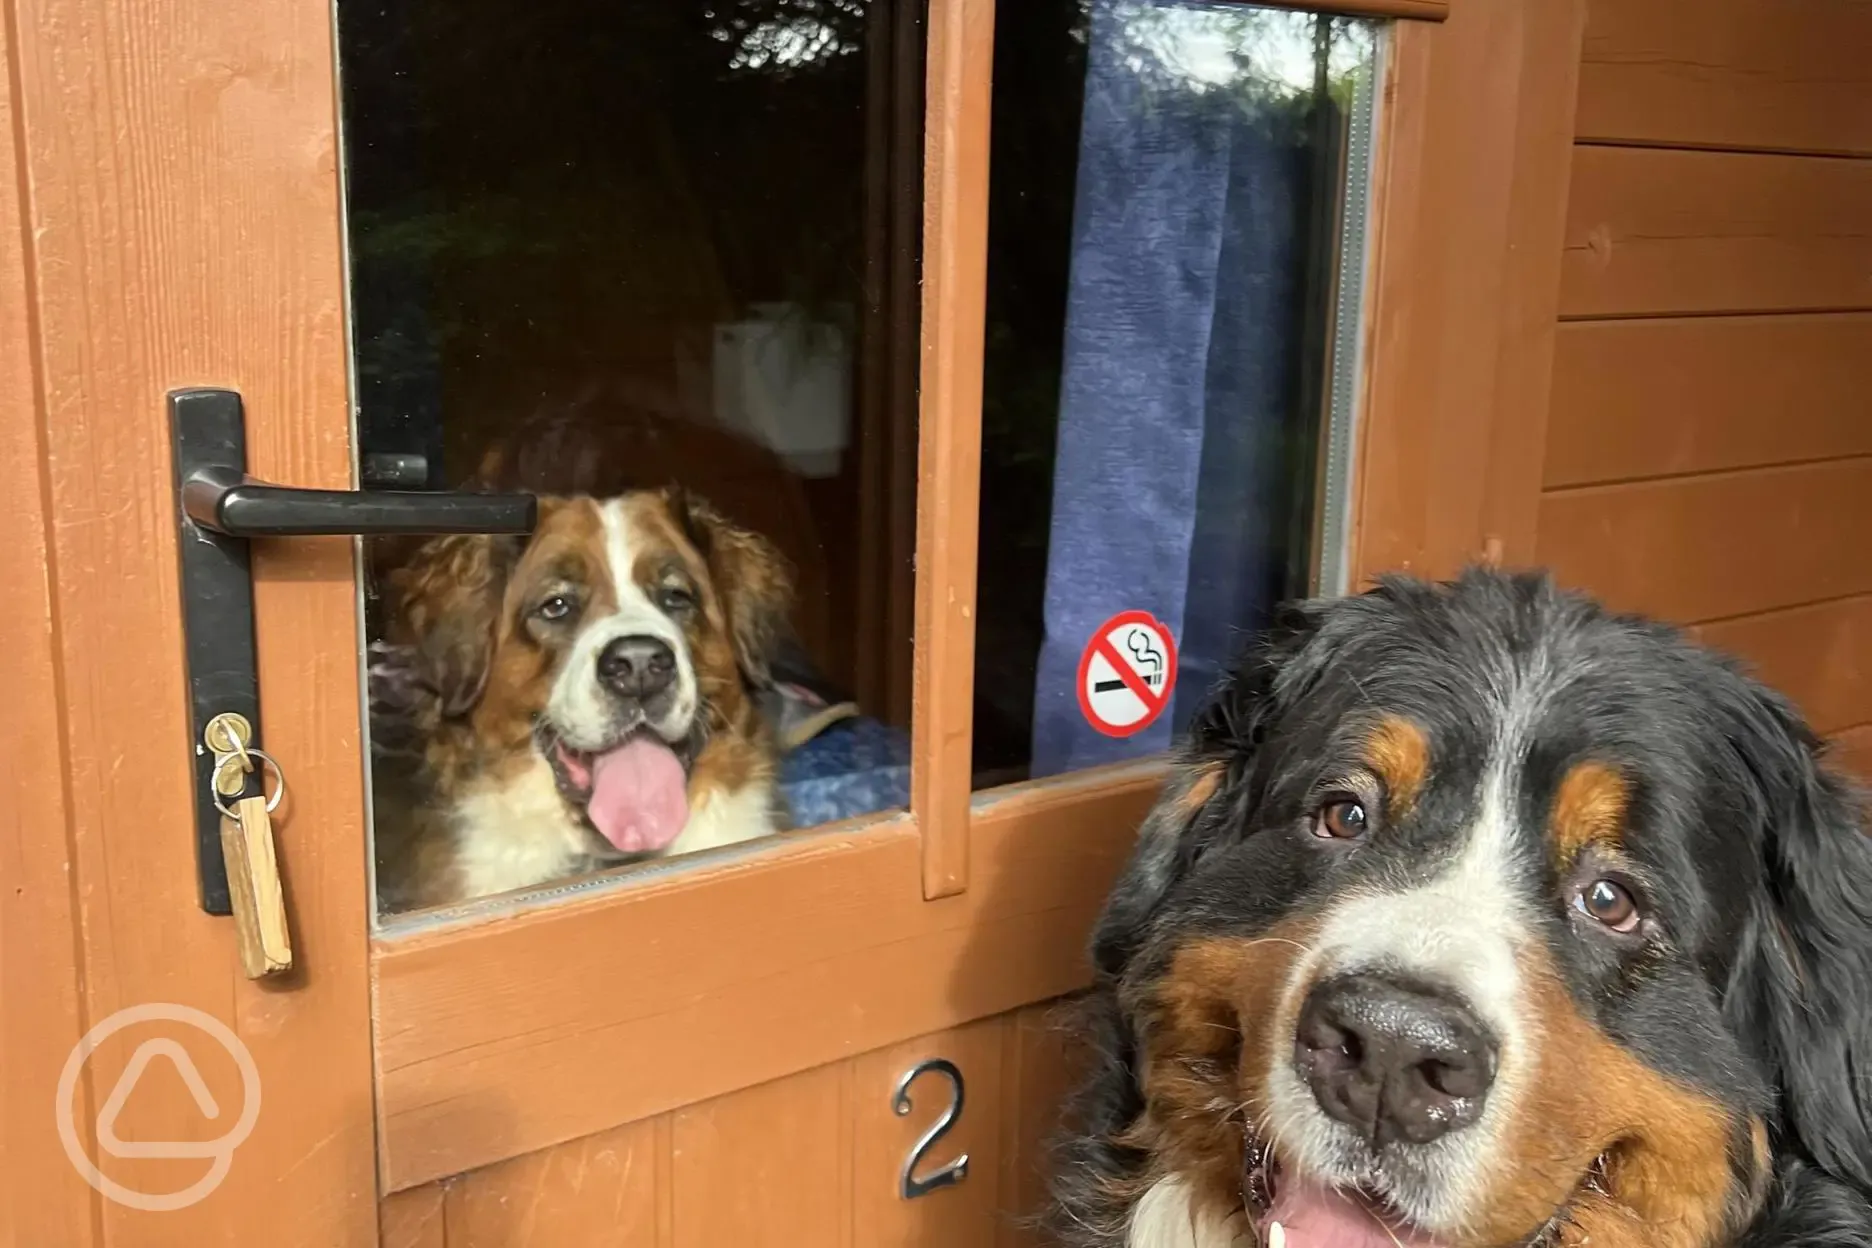 Canine guests